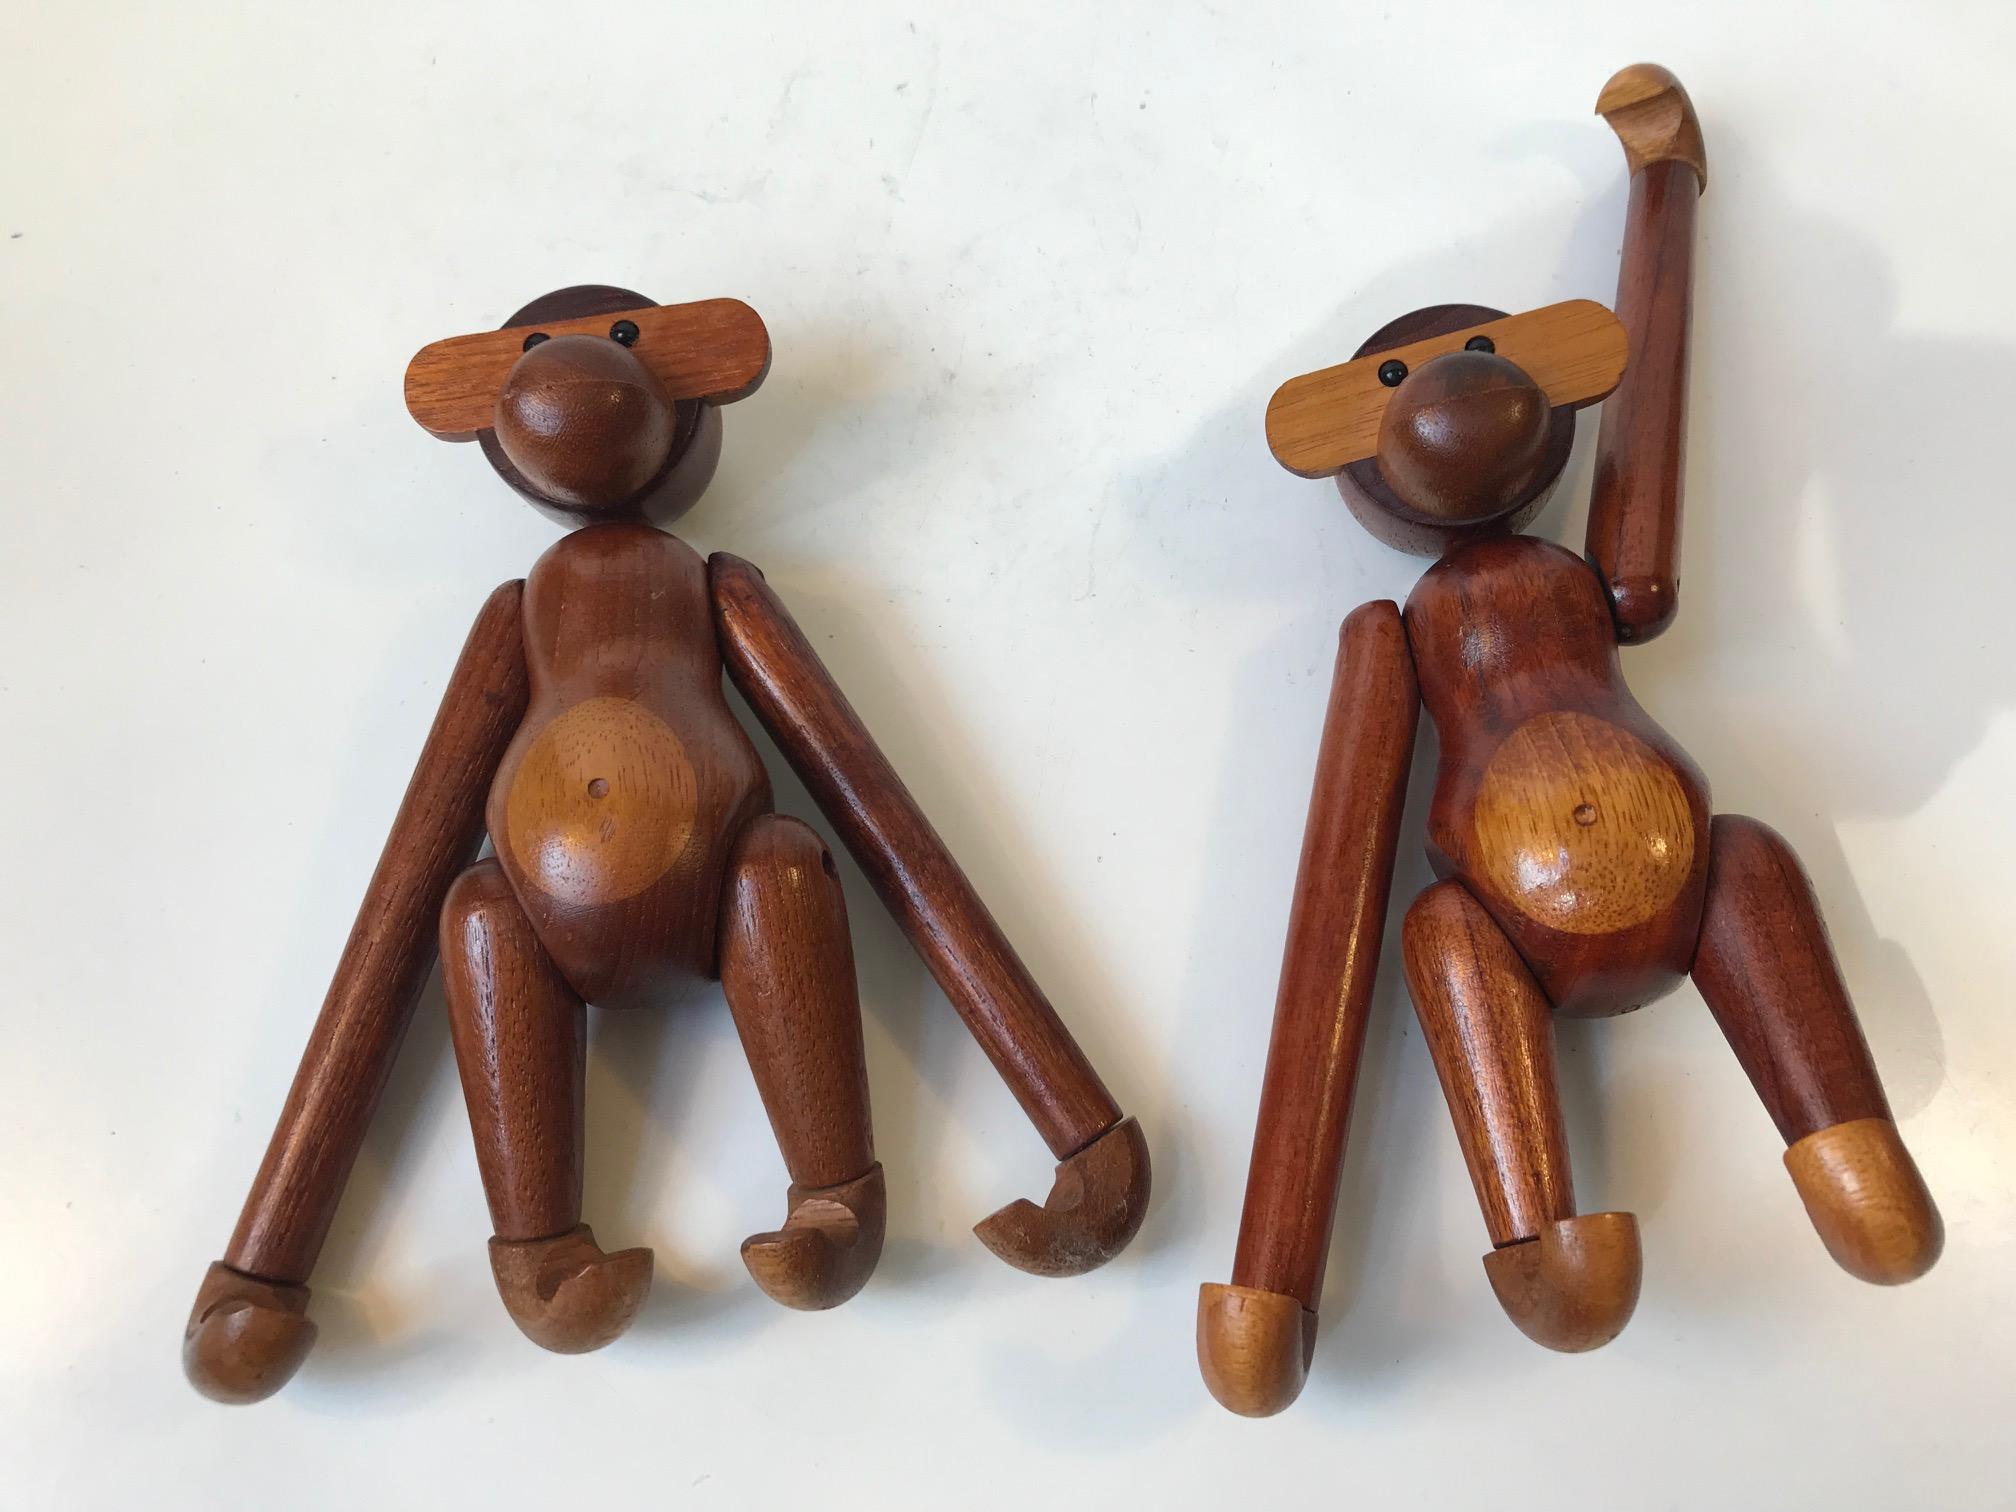 Kay Bojesen, a Pair of Vintage Monkeys with Articulated Limbs, Denmark 1